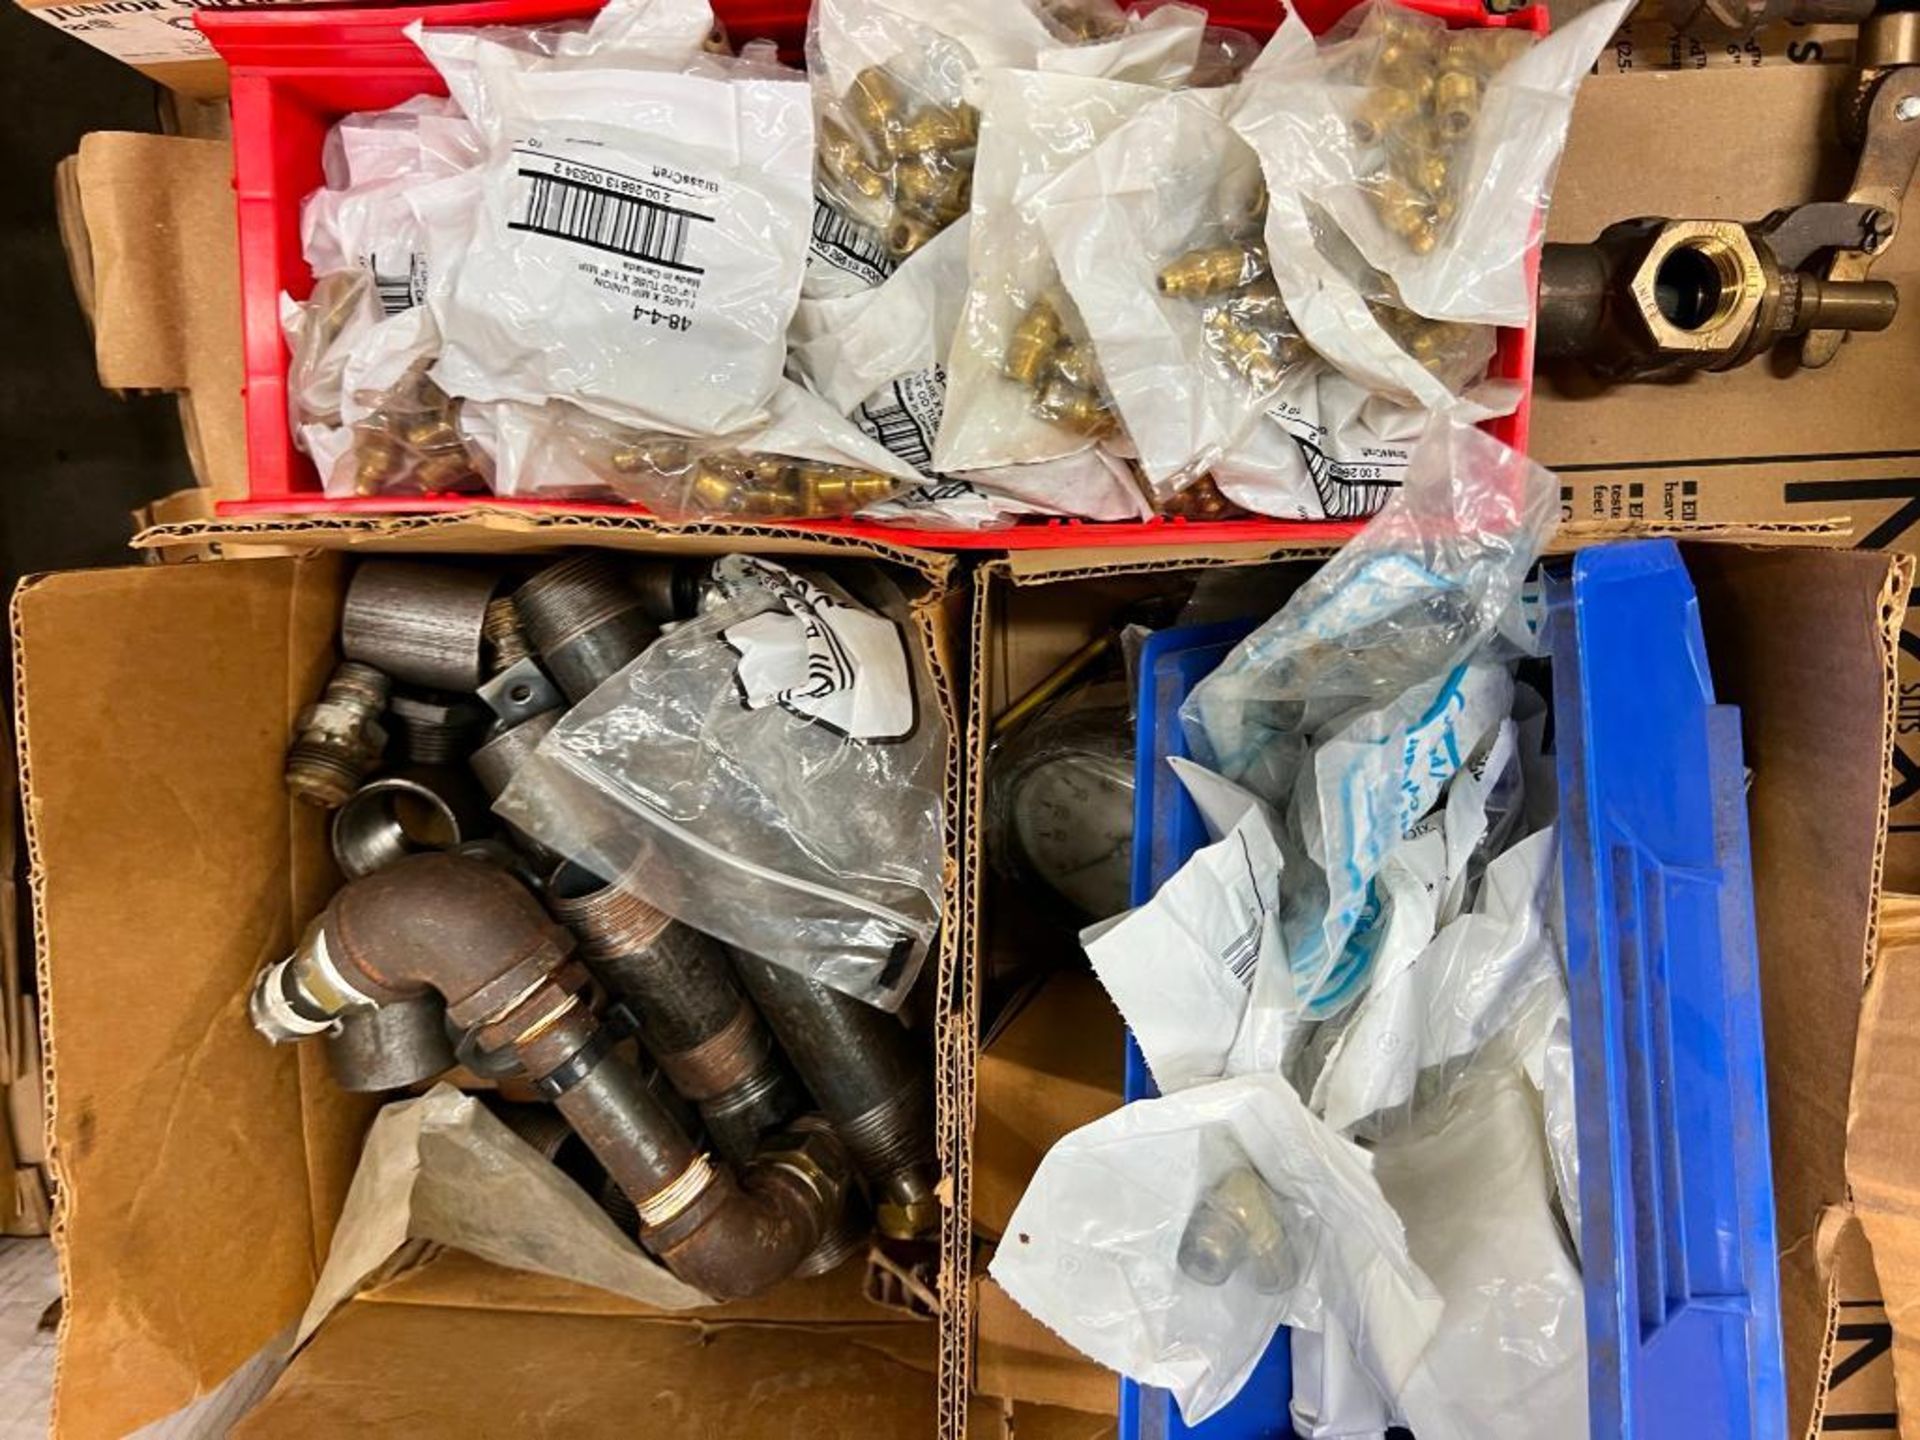 MISC. SKID OF VALVES, PLUMBING PARTS, FITTINGS, & TOOLS - Image 2 of 5